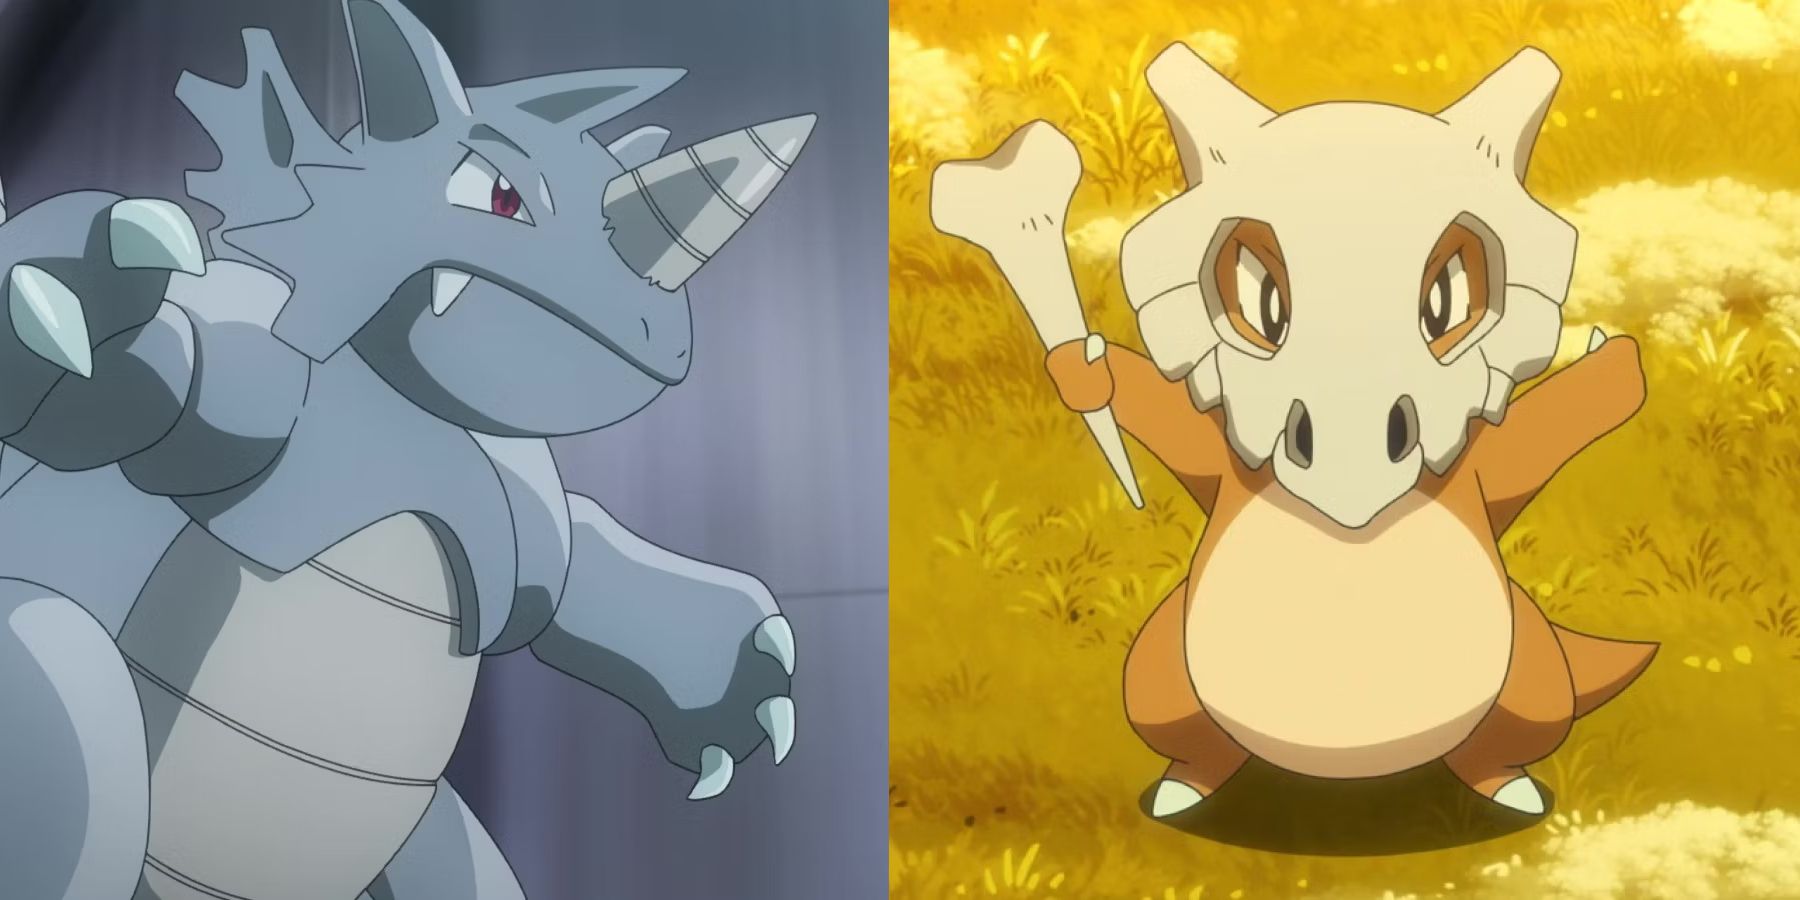 A split-screen view of Rhydon and Cubone from the Pokemon anime.